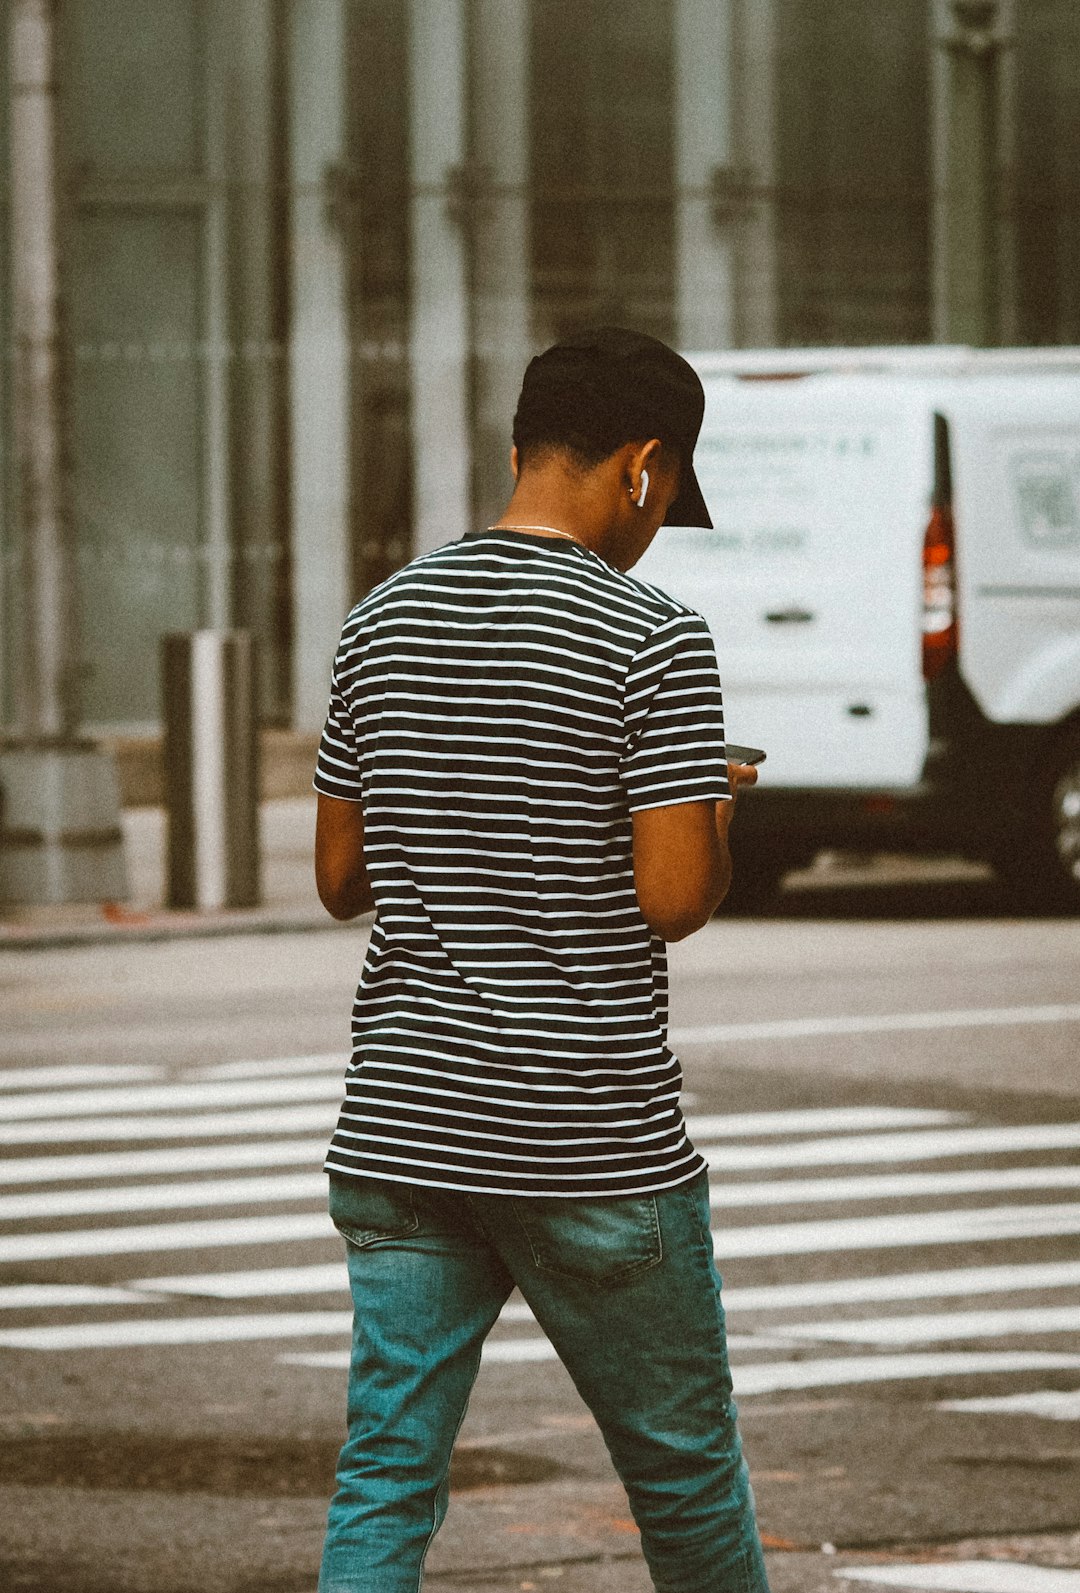 man in black and white striped shirt and blue denim jeans standing on sidewalk during daytime